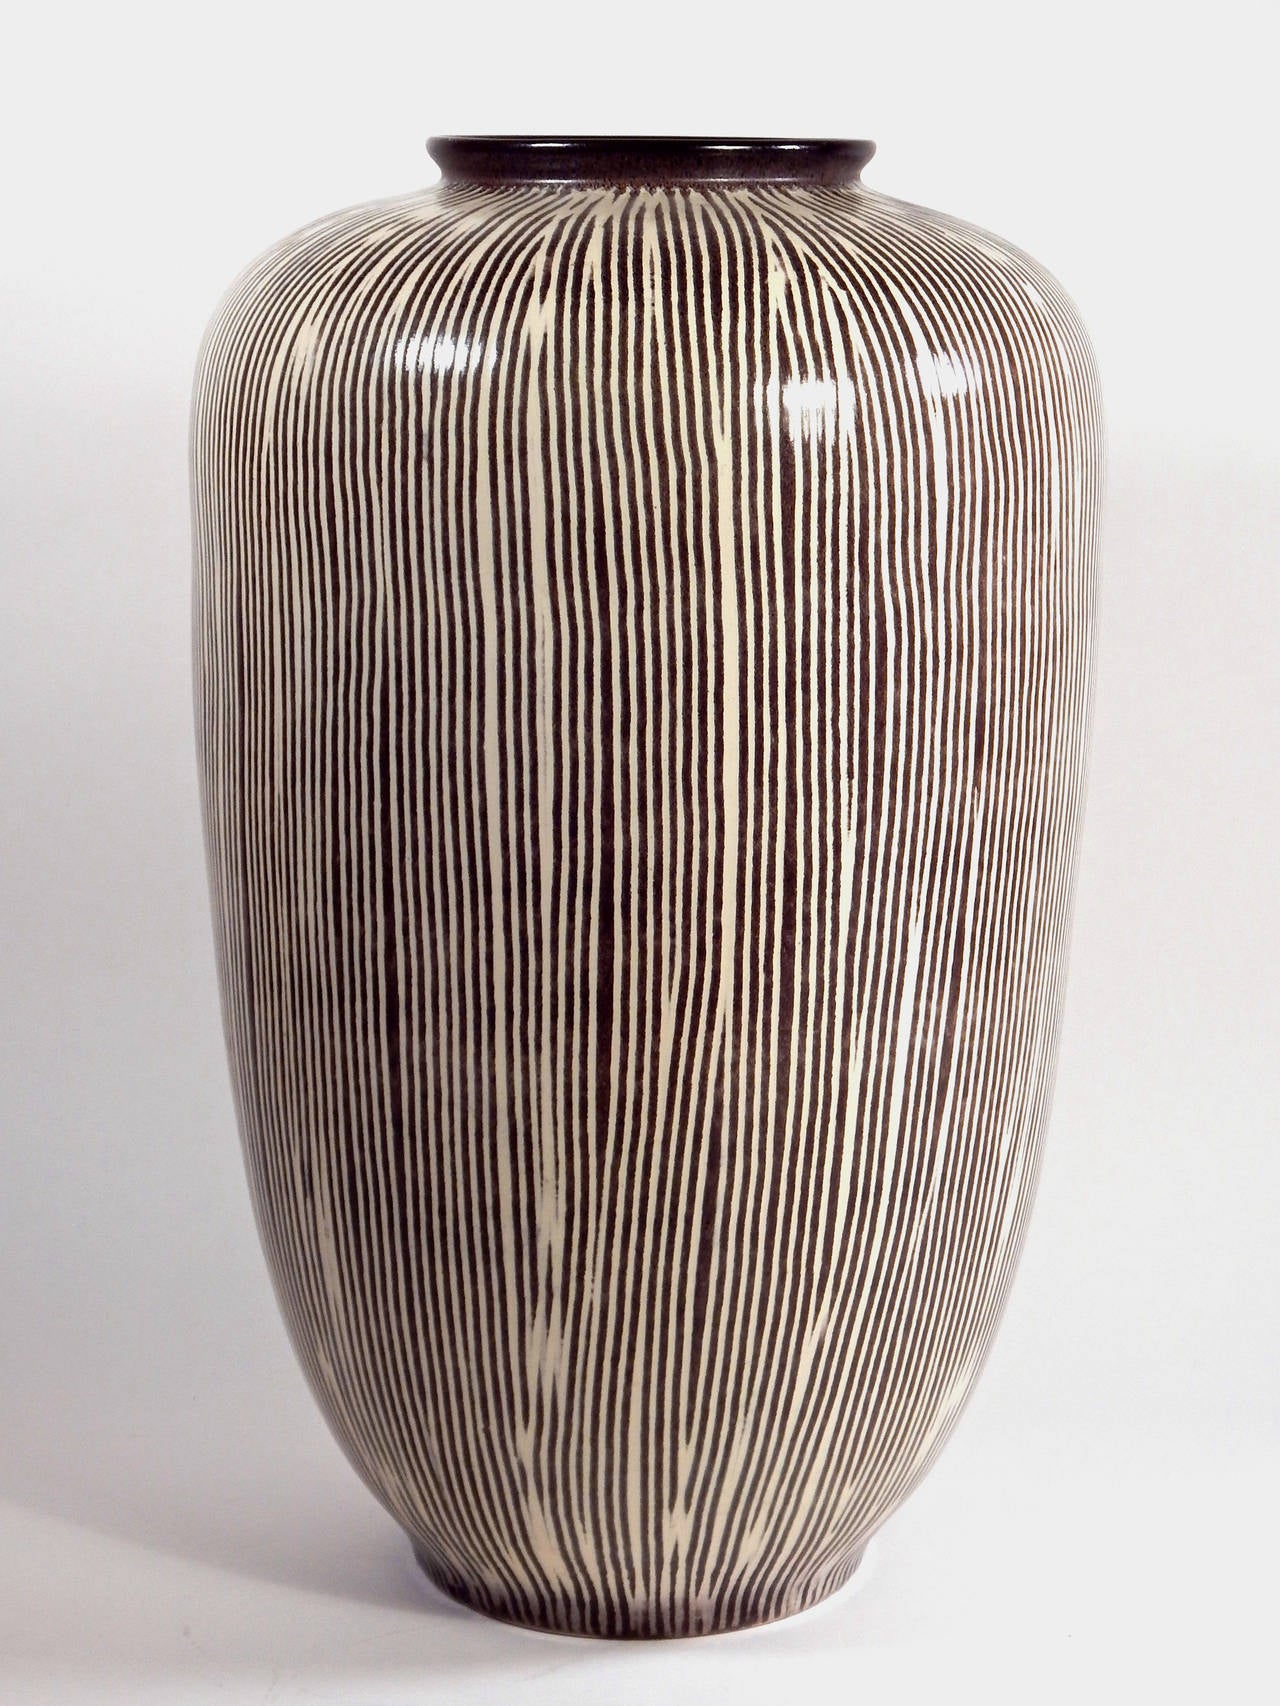 Stunning west German floor vase by U-keramik in off-white and black. Excellent condition.